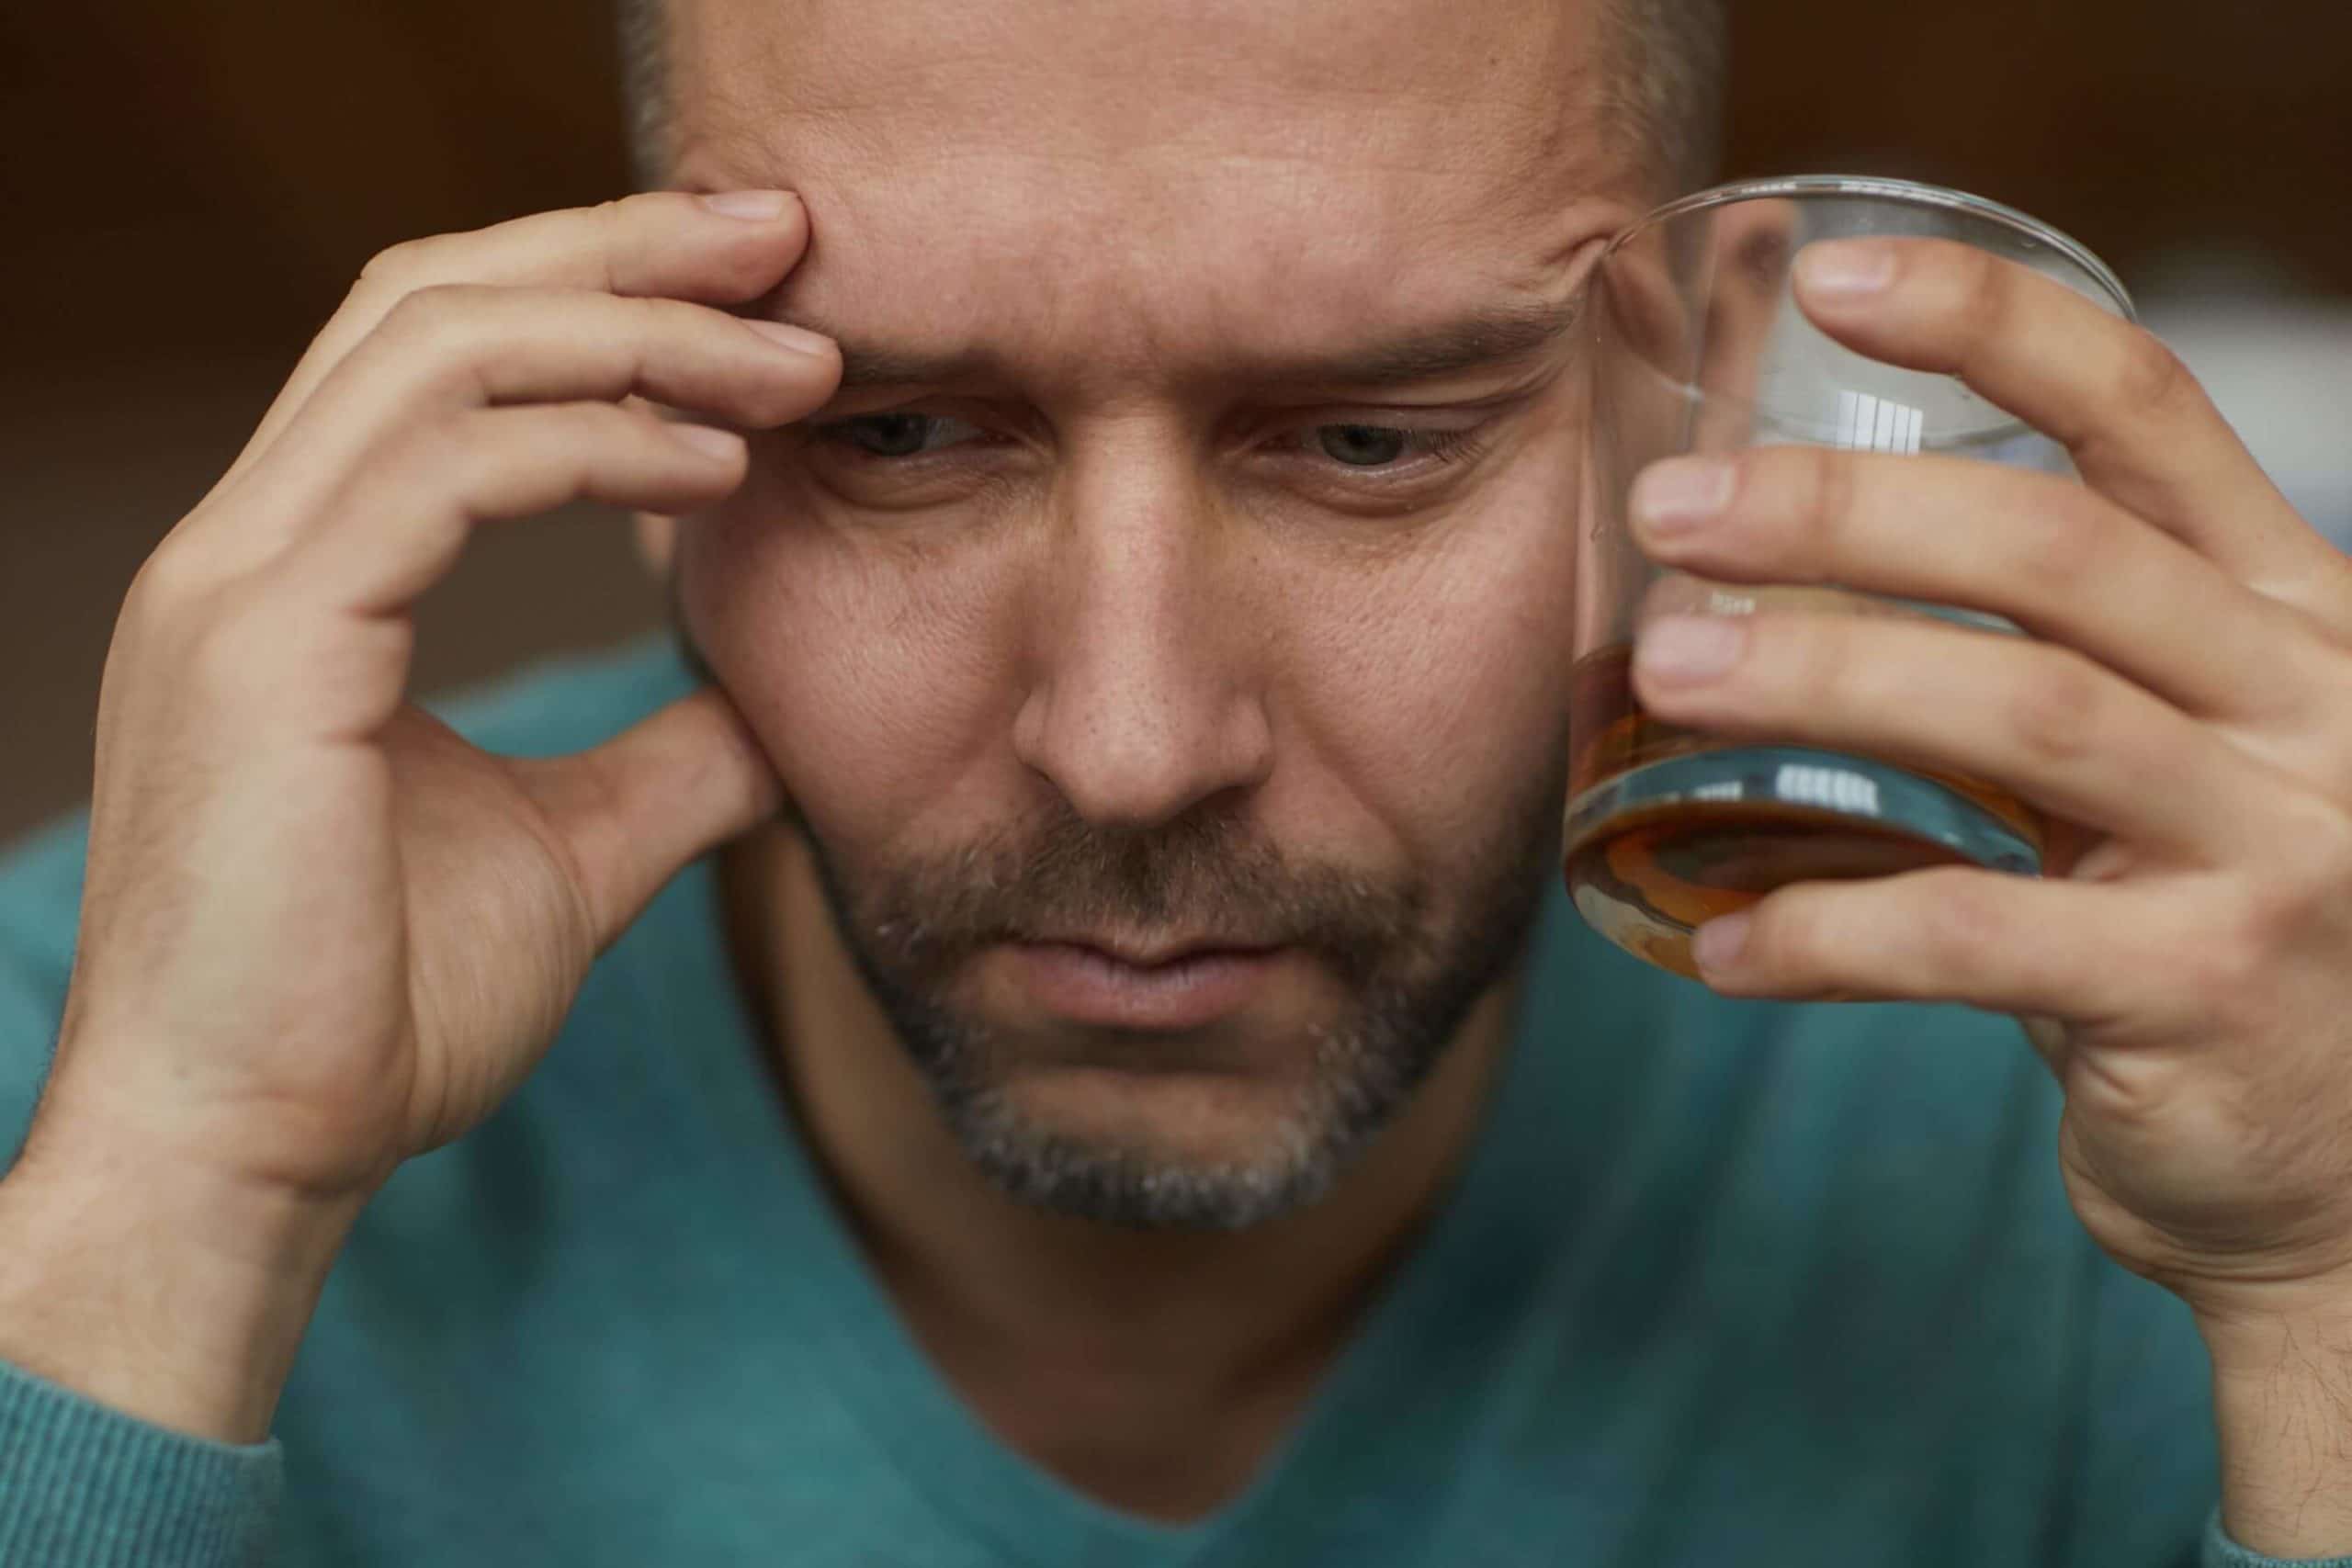 Man contemplating quitting drinking alcohol.